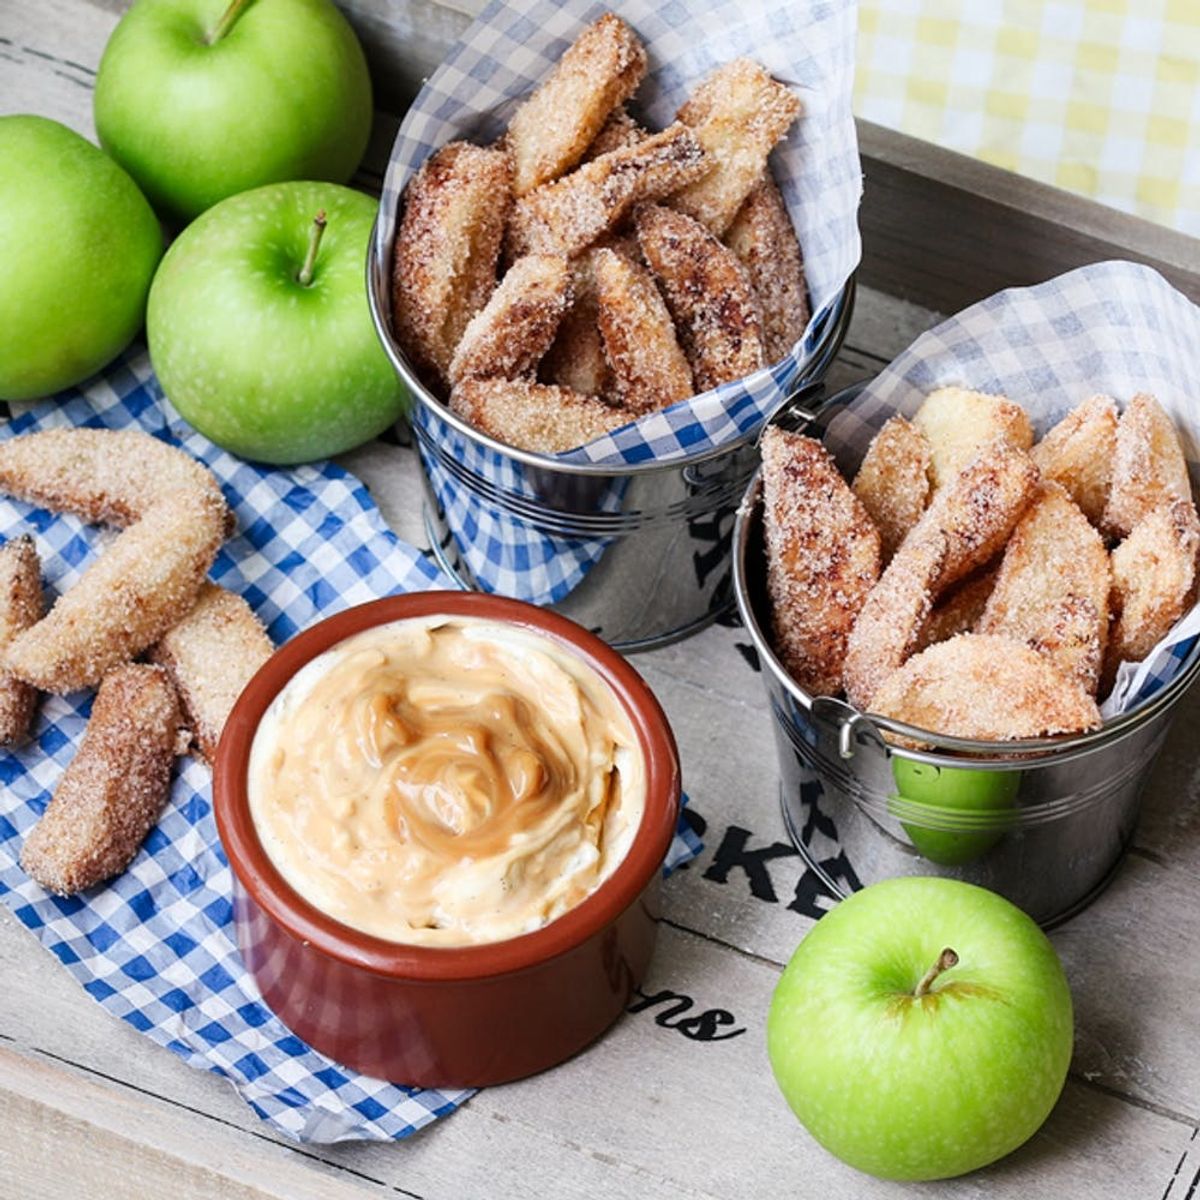 How to Make Apple Fries With Cheesecake Dip